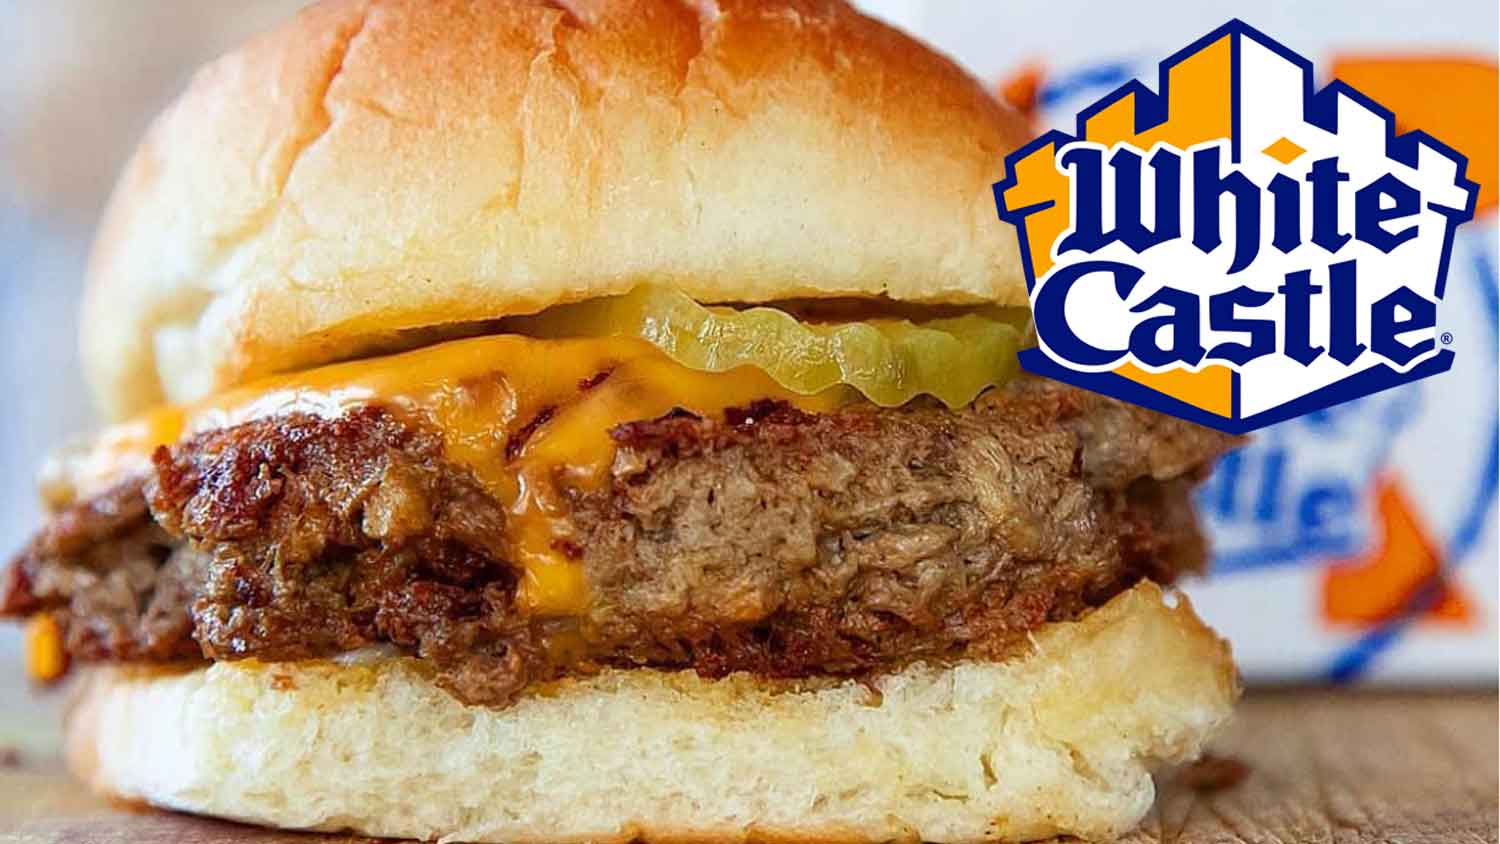 These ‘New New’ Vegan Sliders Are at All 377 White Castles